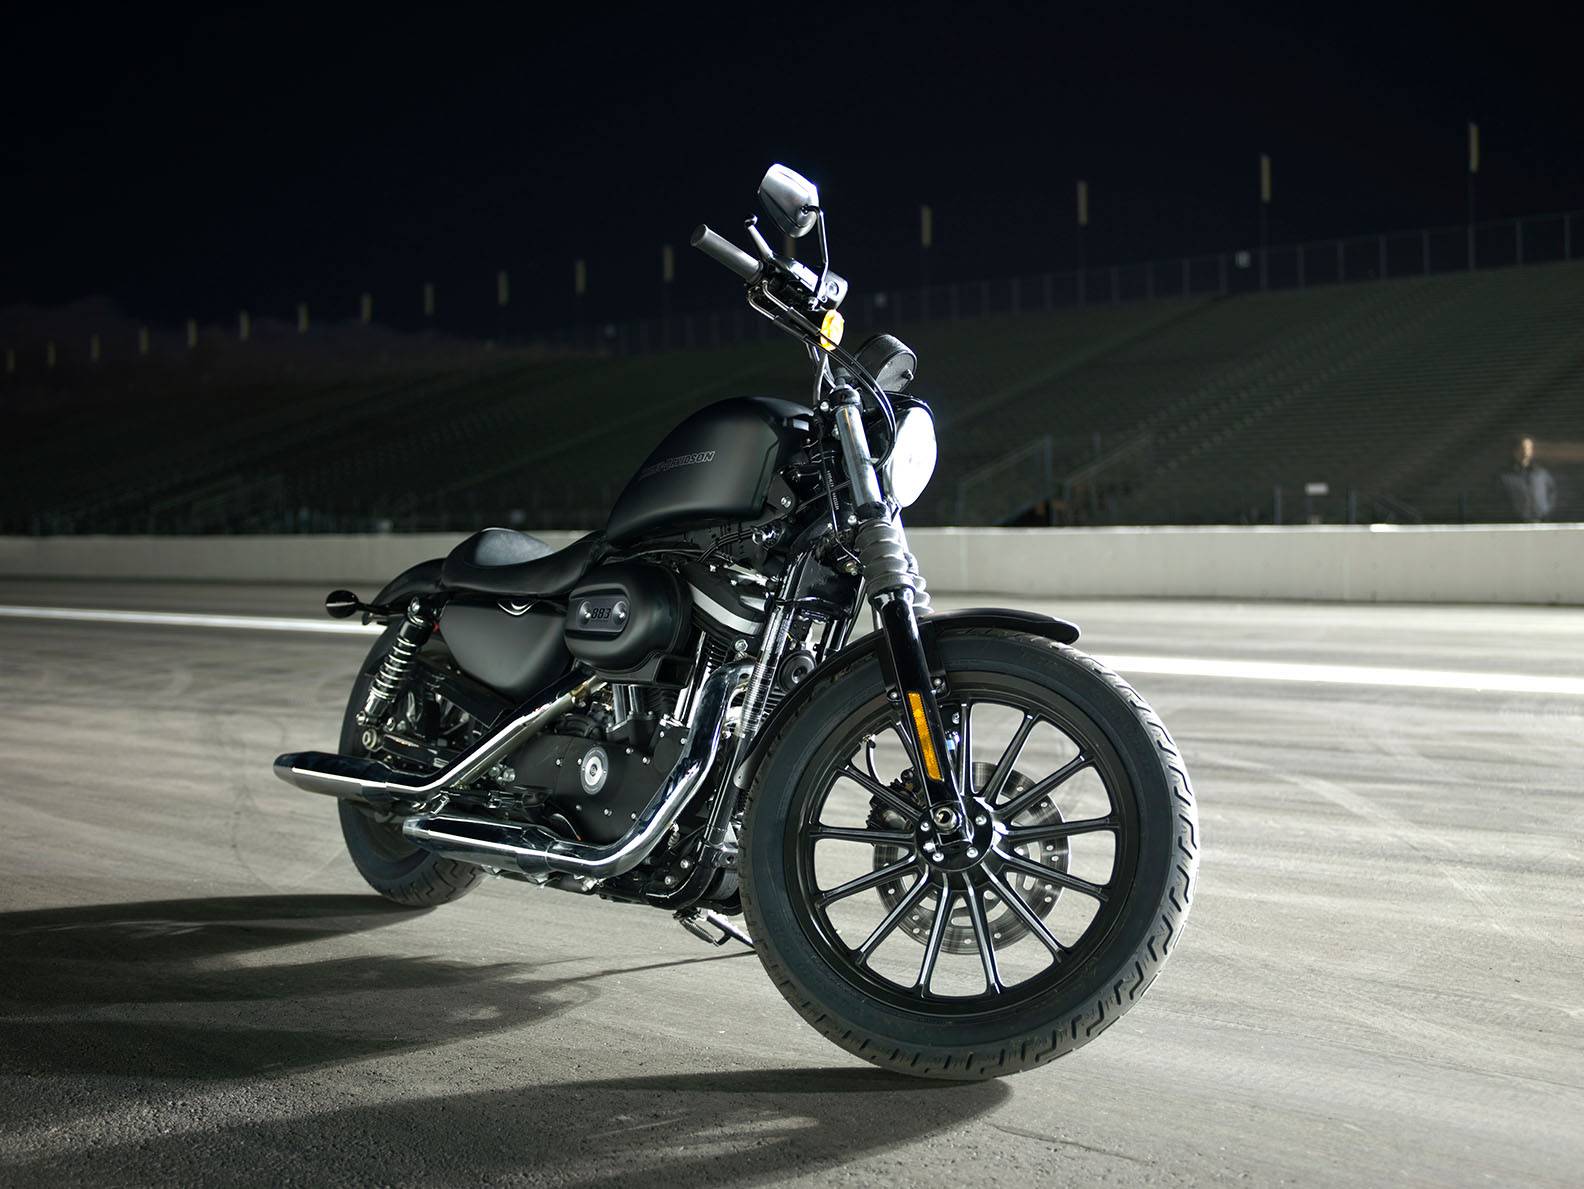 Harley Davidson Iron 883 10 Photo, Image, Picture and wallpaper